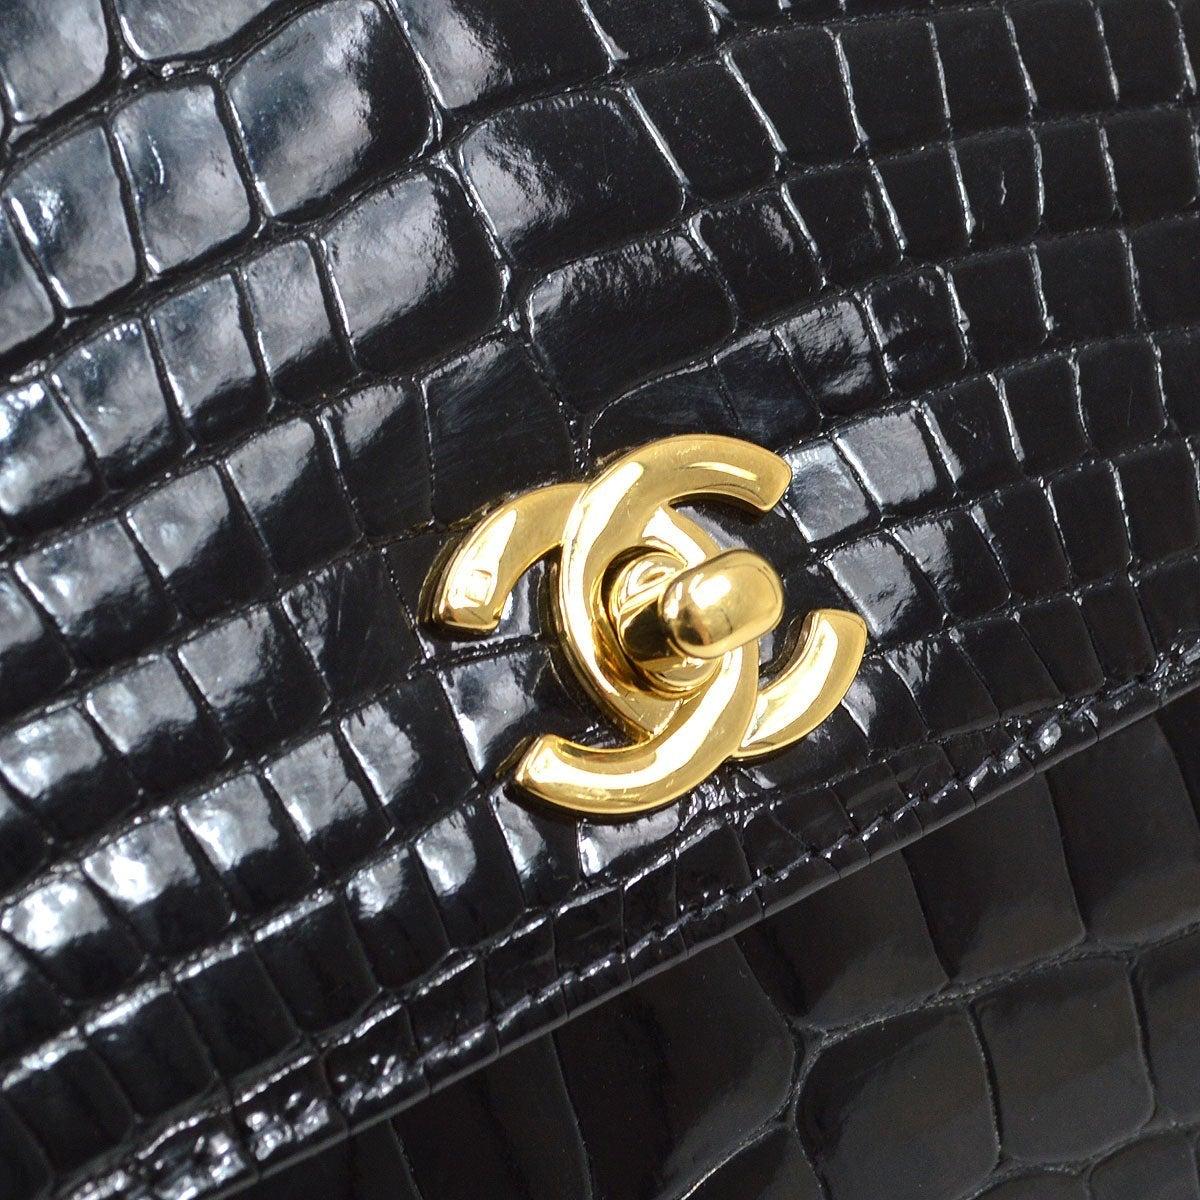 Pre-Owned Vintage Condition
From 1999 Collection
Crocodile Leather
Gold Tone Hardware
Leather Lining
Measures 11.5